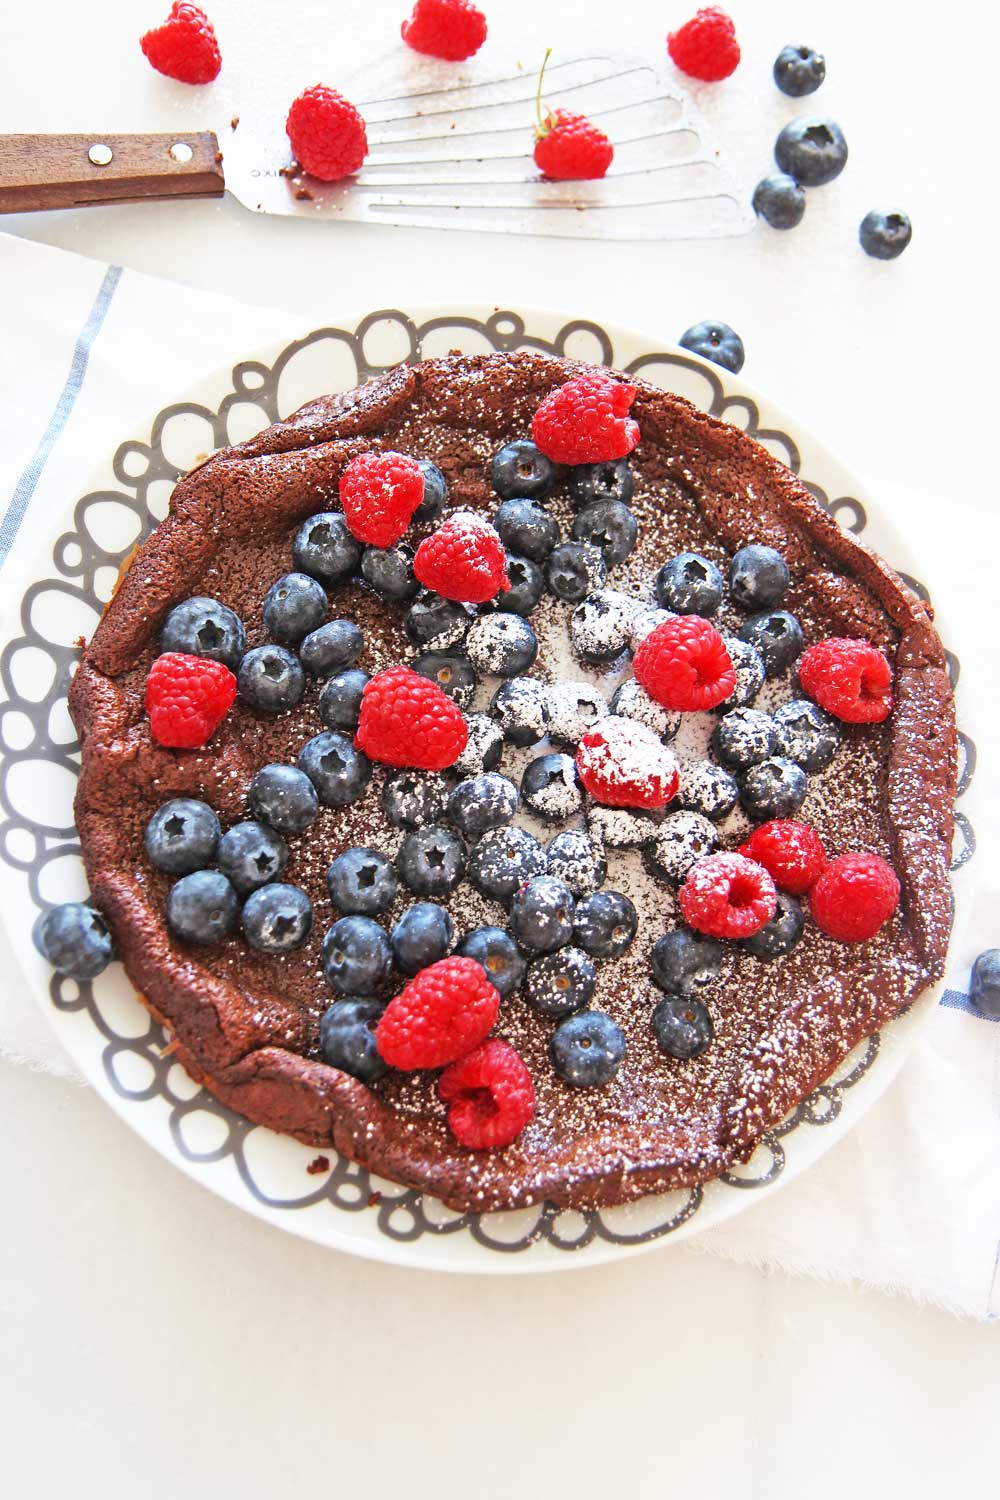 How To Make a Flourless Chocolate Tart. This is an easy recipe for beginners. Just grab chocolate, eggs, coffee, and butter. Perfect Passover dessert and gluten free dessert. Happy Baking! www.ChopHappy.com #Passoverdessert #glutenfreedessert